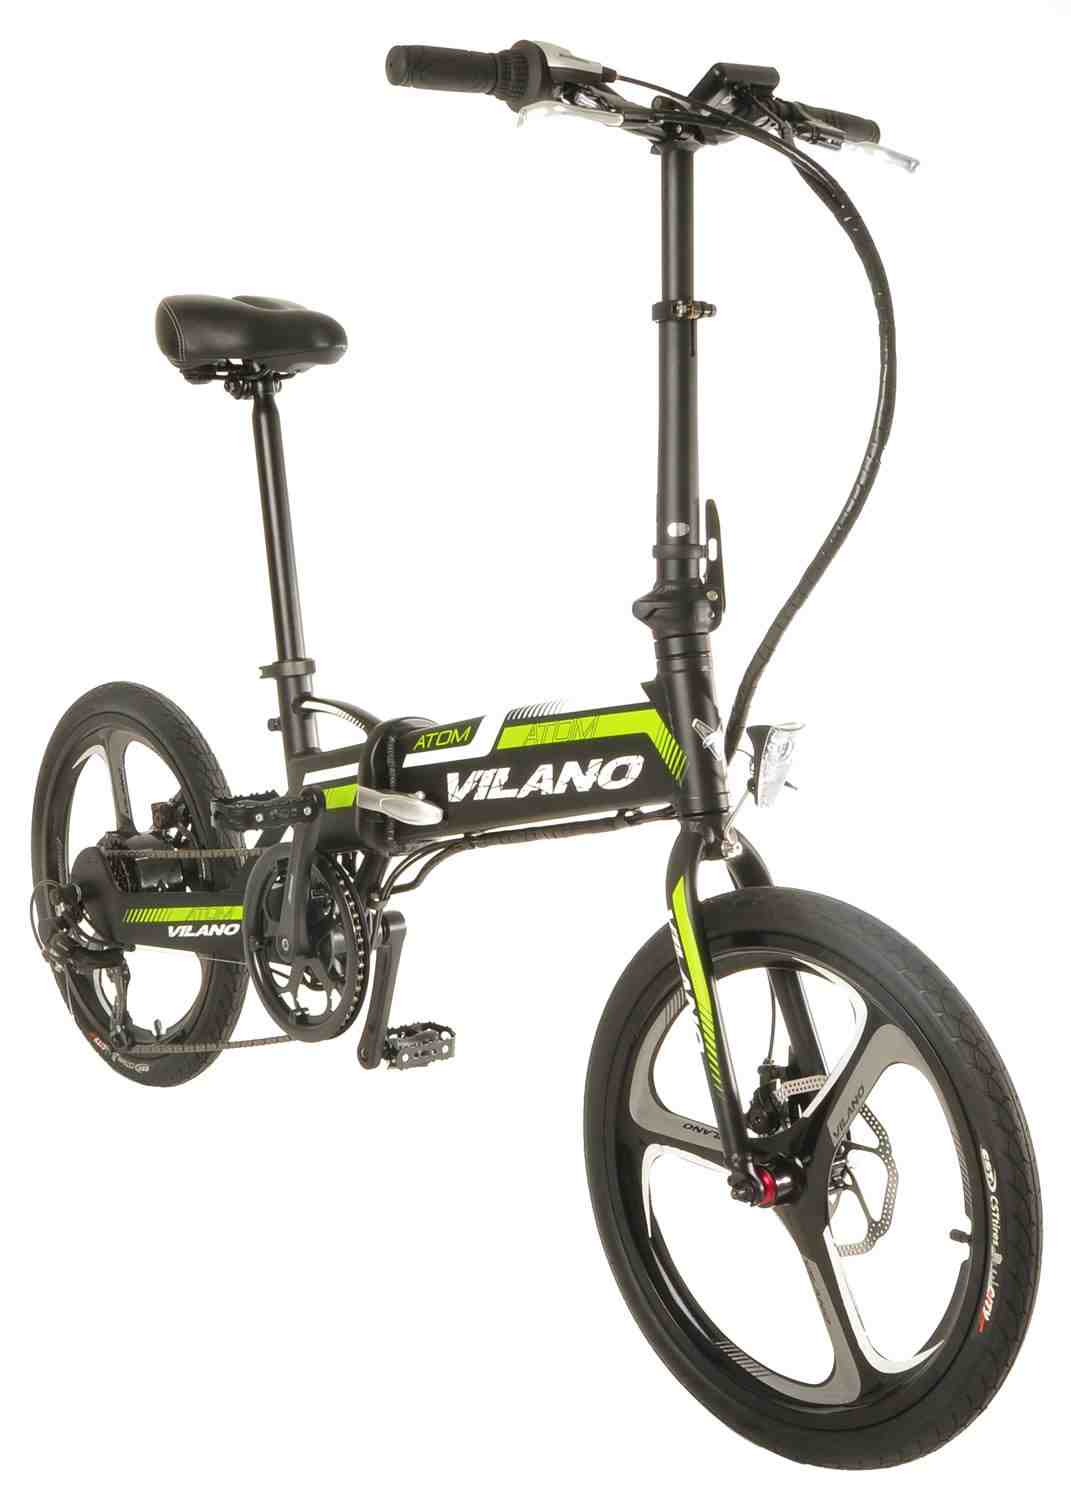 What is the best electric folding bike?